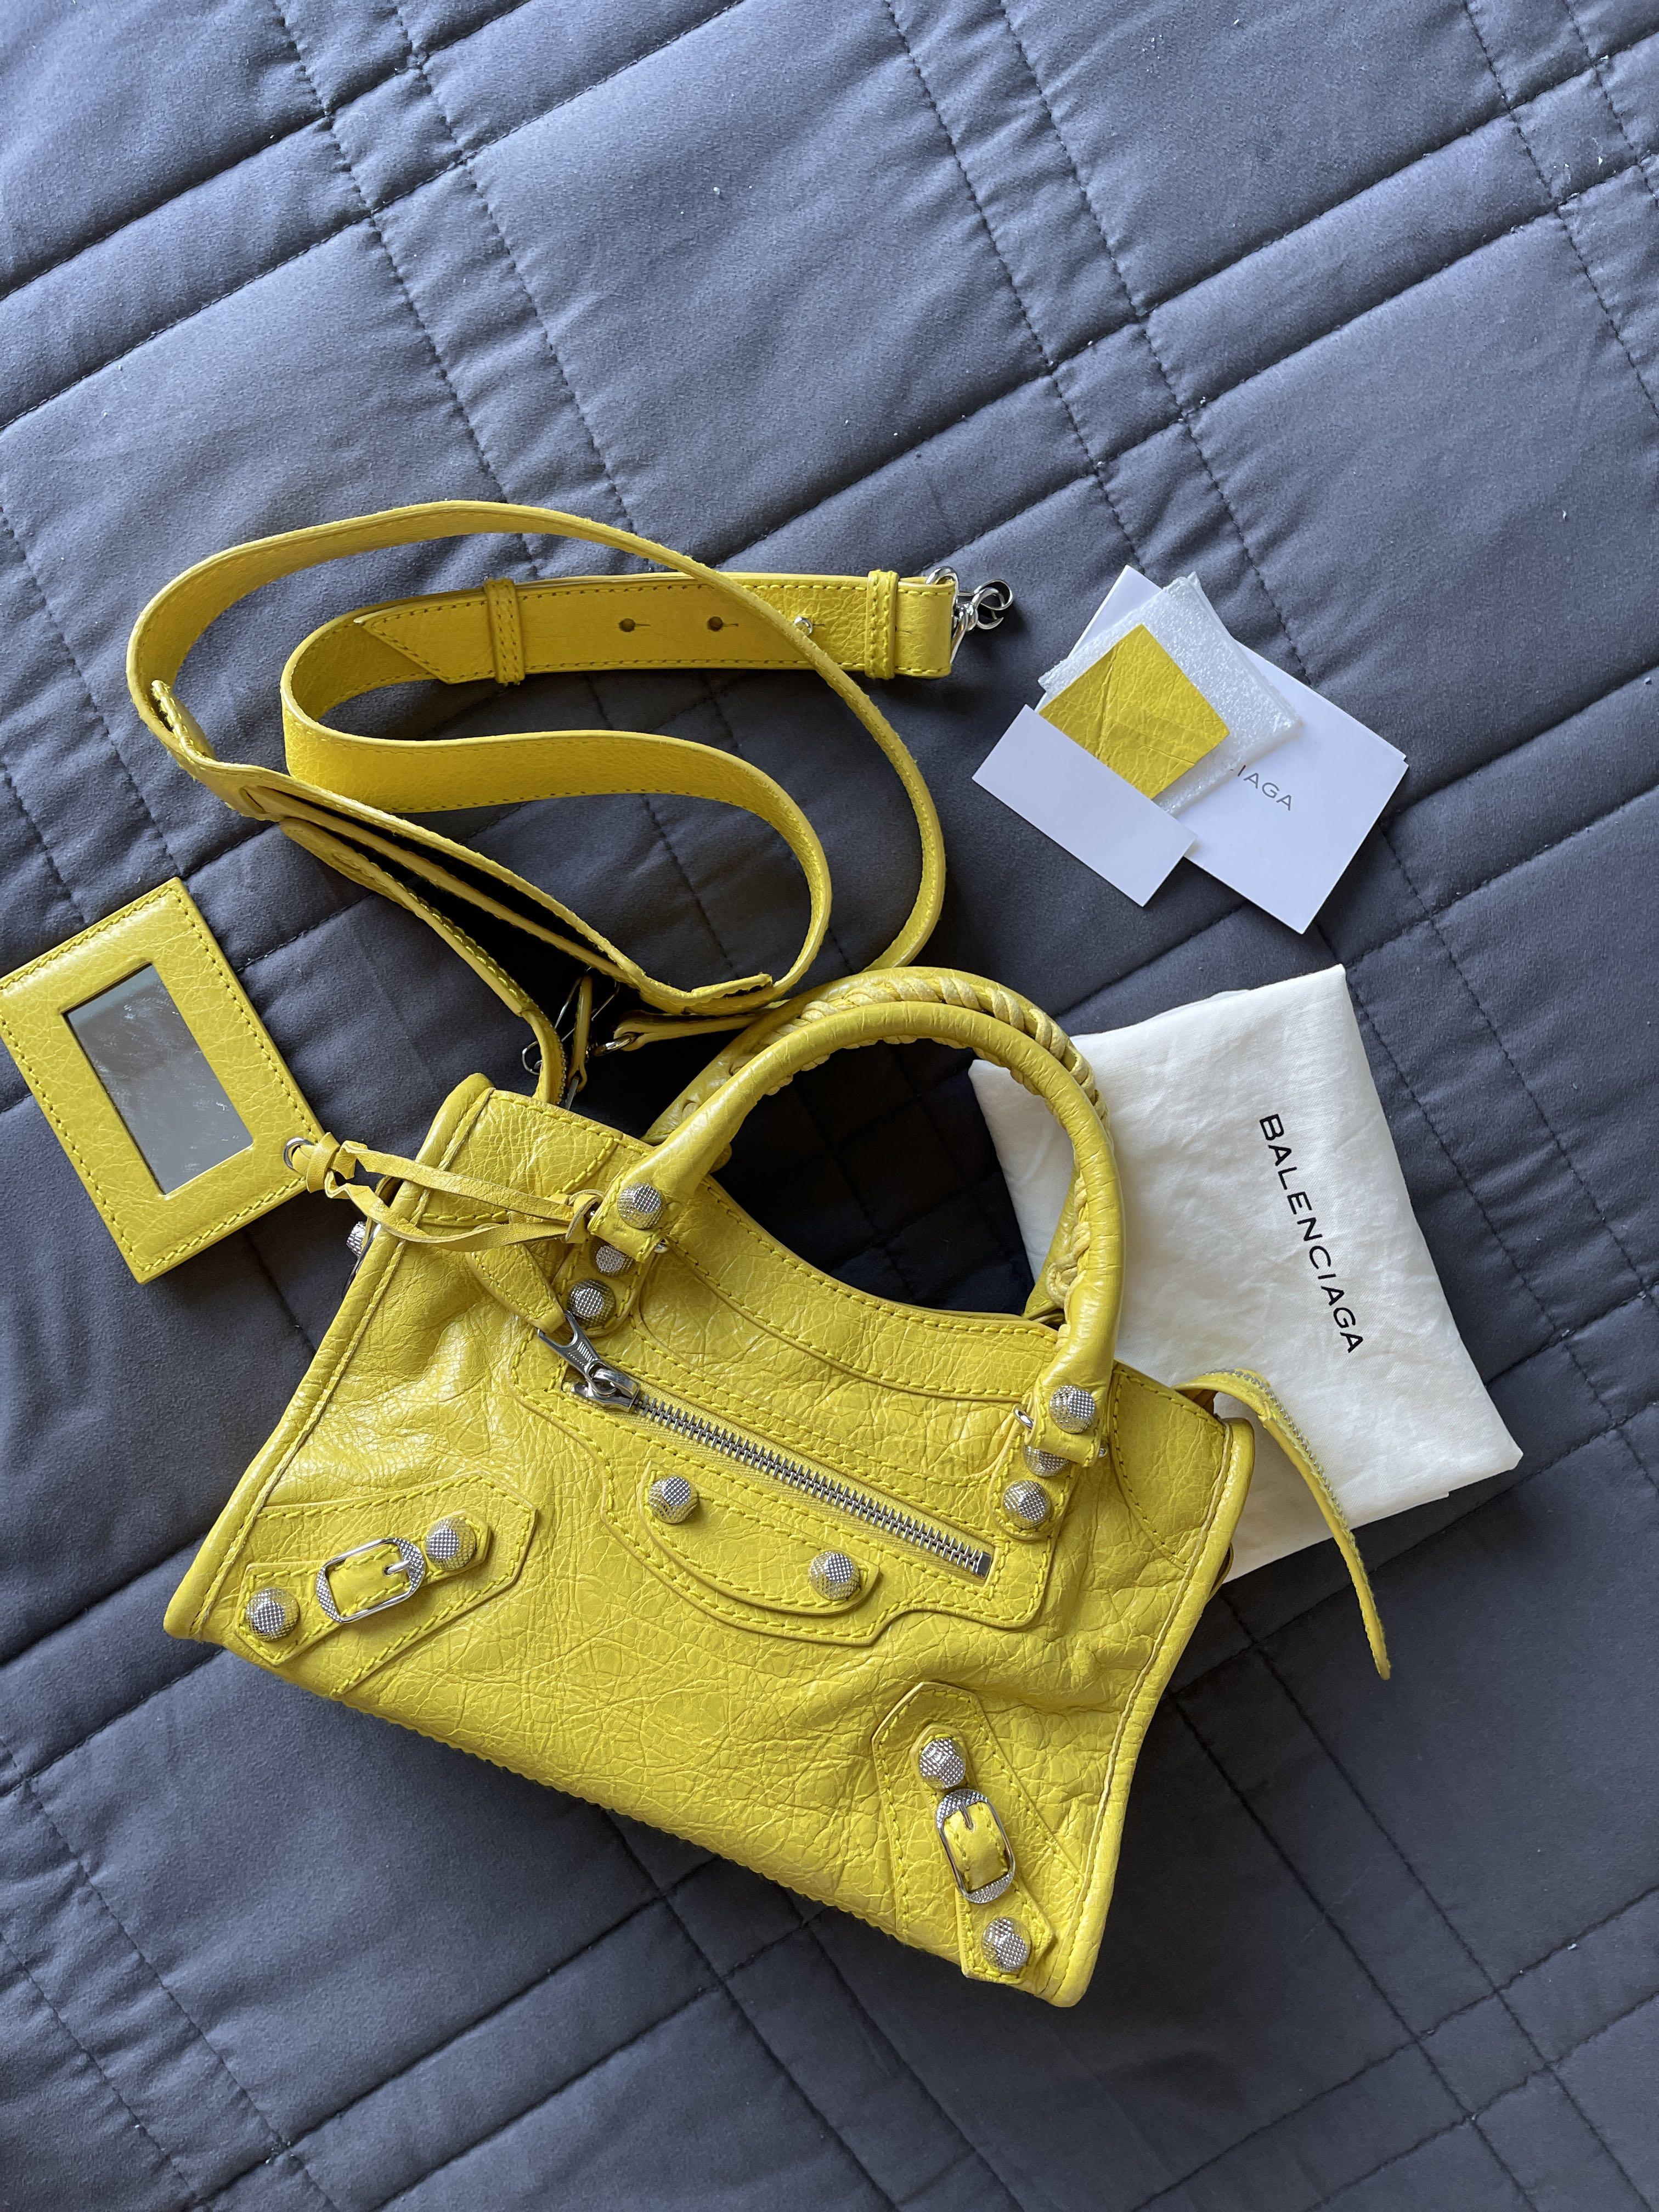 Balenciaga Yellow Leather The Work City Bag  Mine  Yours